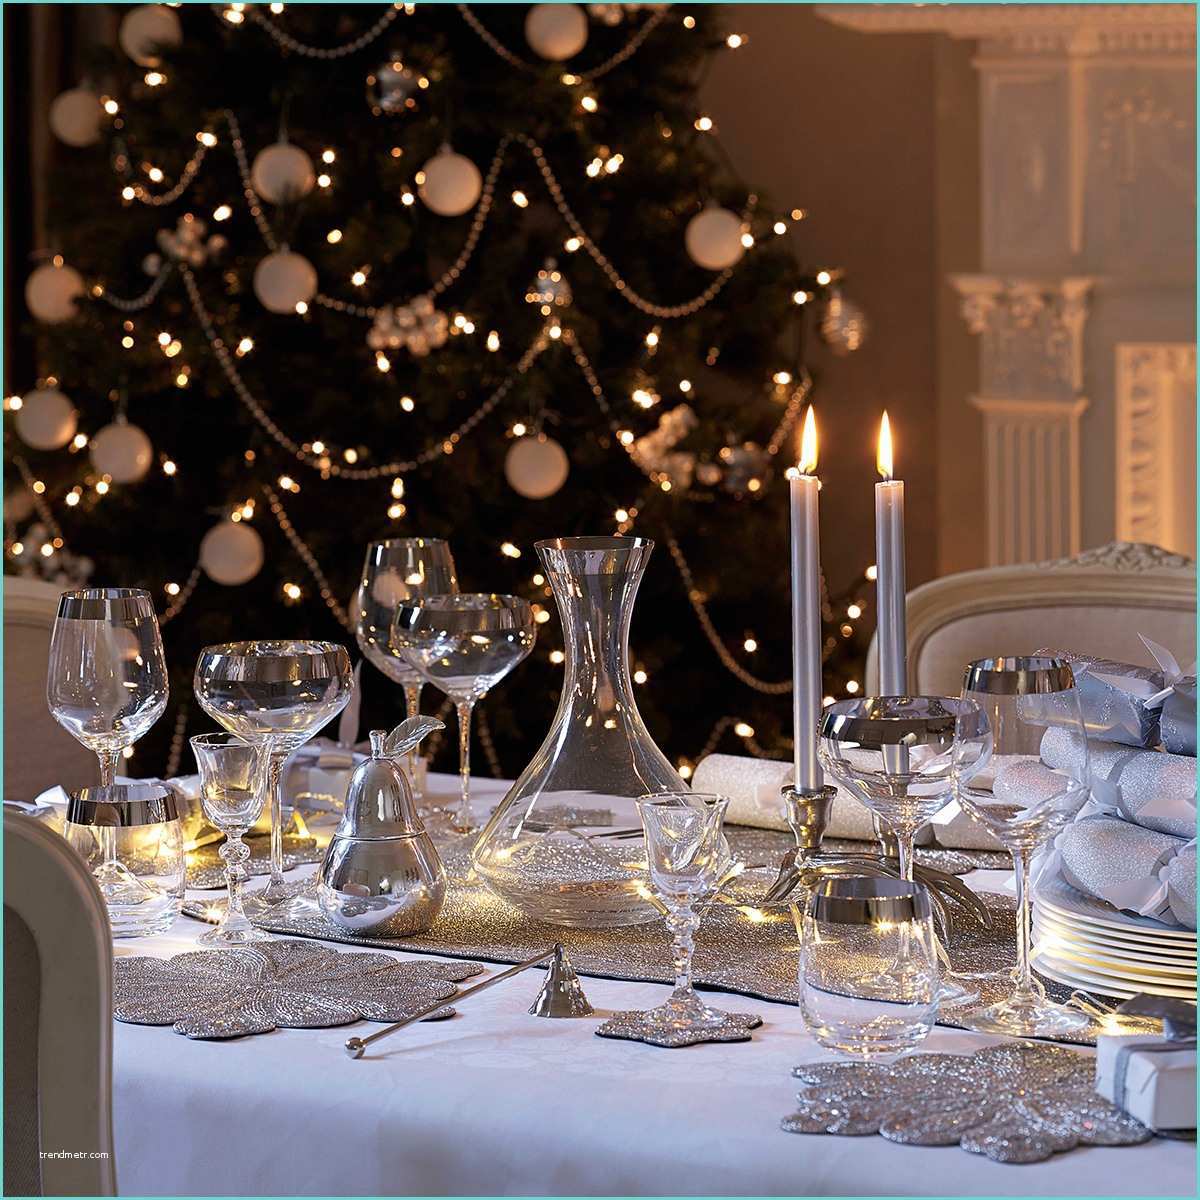 Ides Dcoration Table Noel Christmas Table Decoration Ideas for Festive Dining